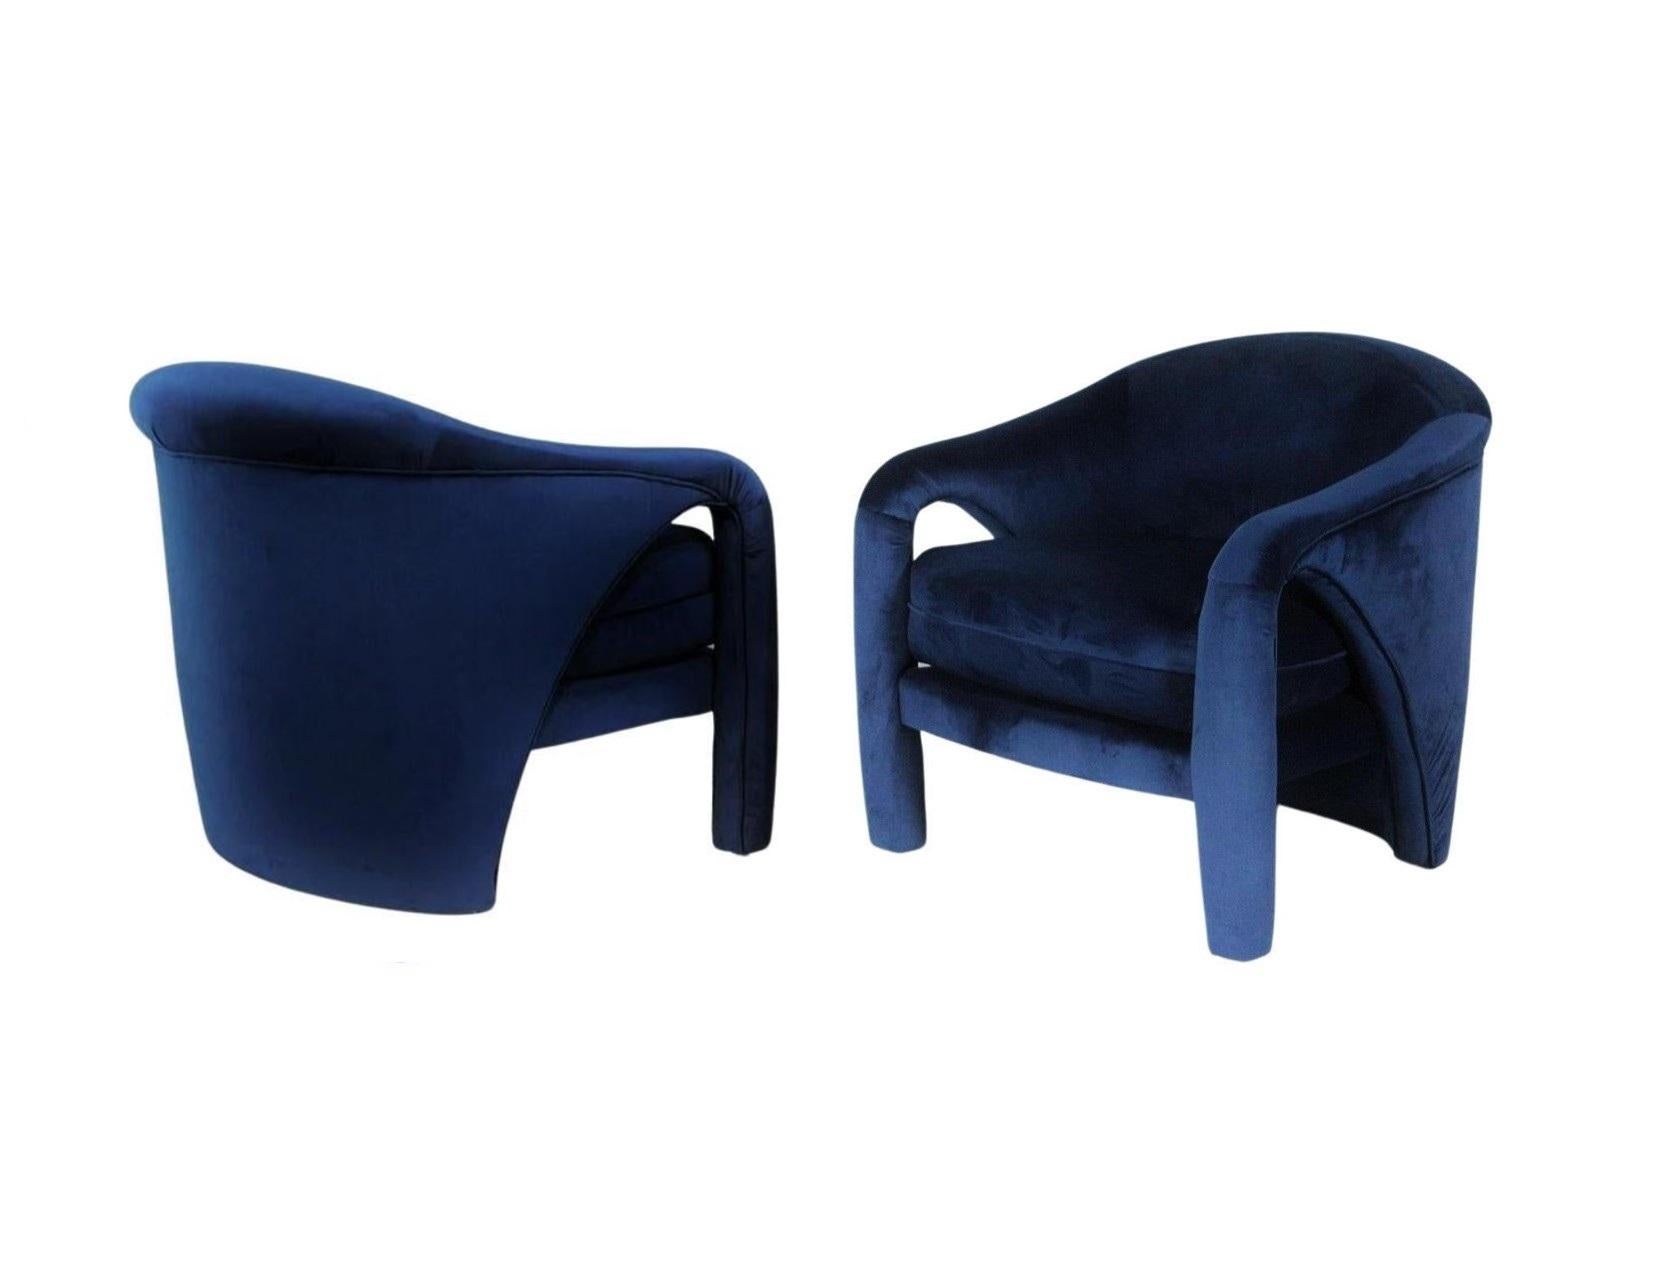 Vladimir Kaganesque Navy Blue Lounge Chairs by Weiman For Sale 2